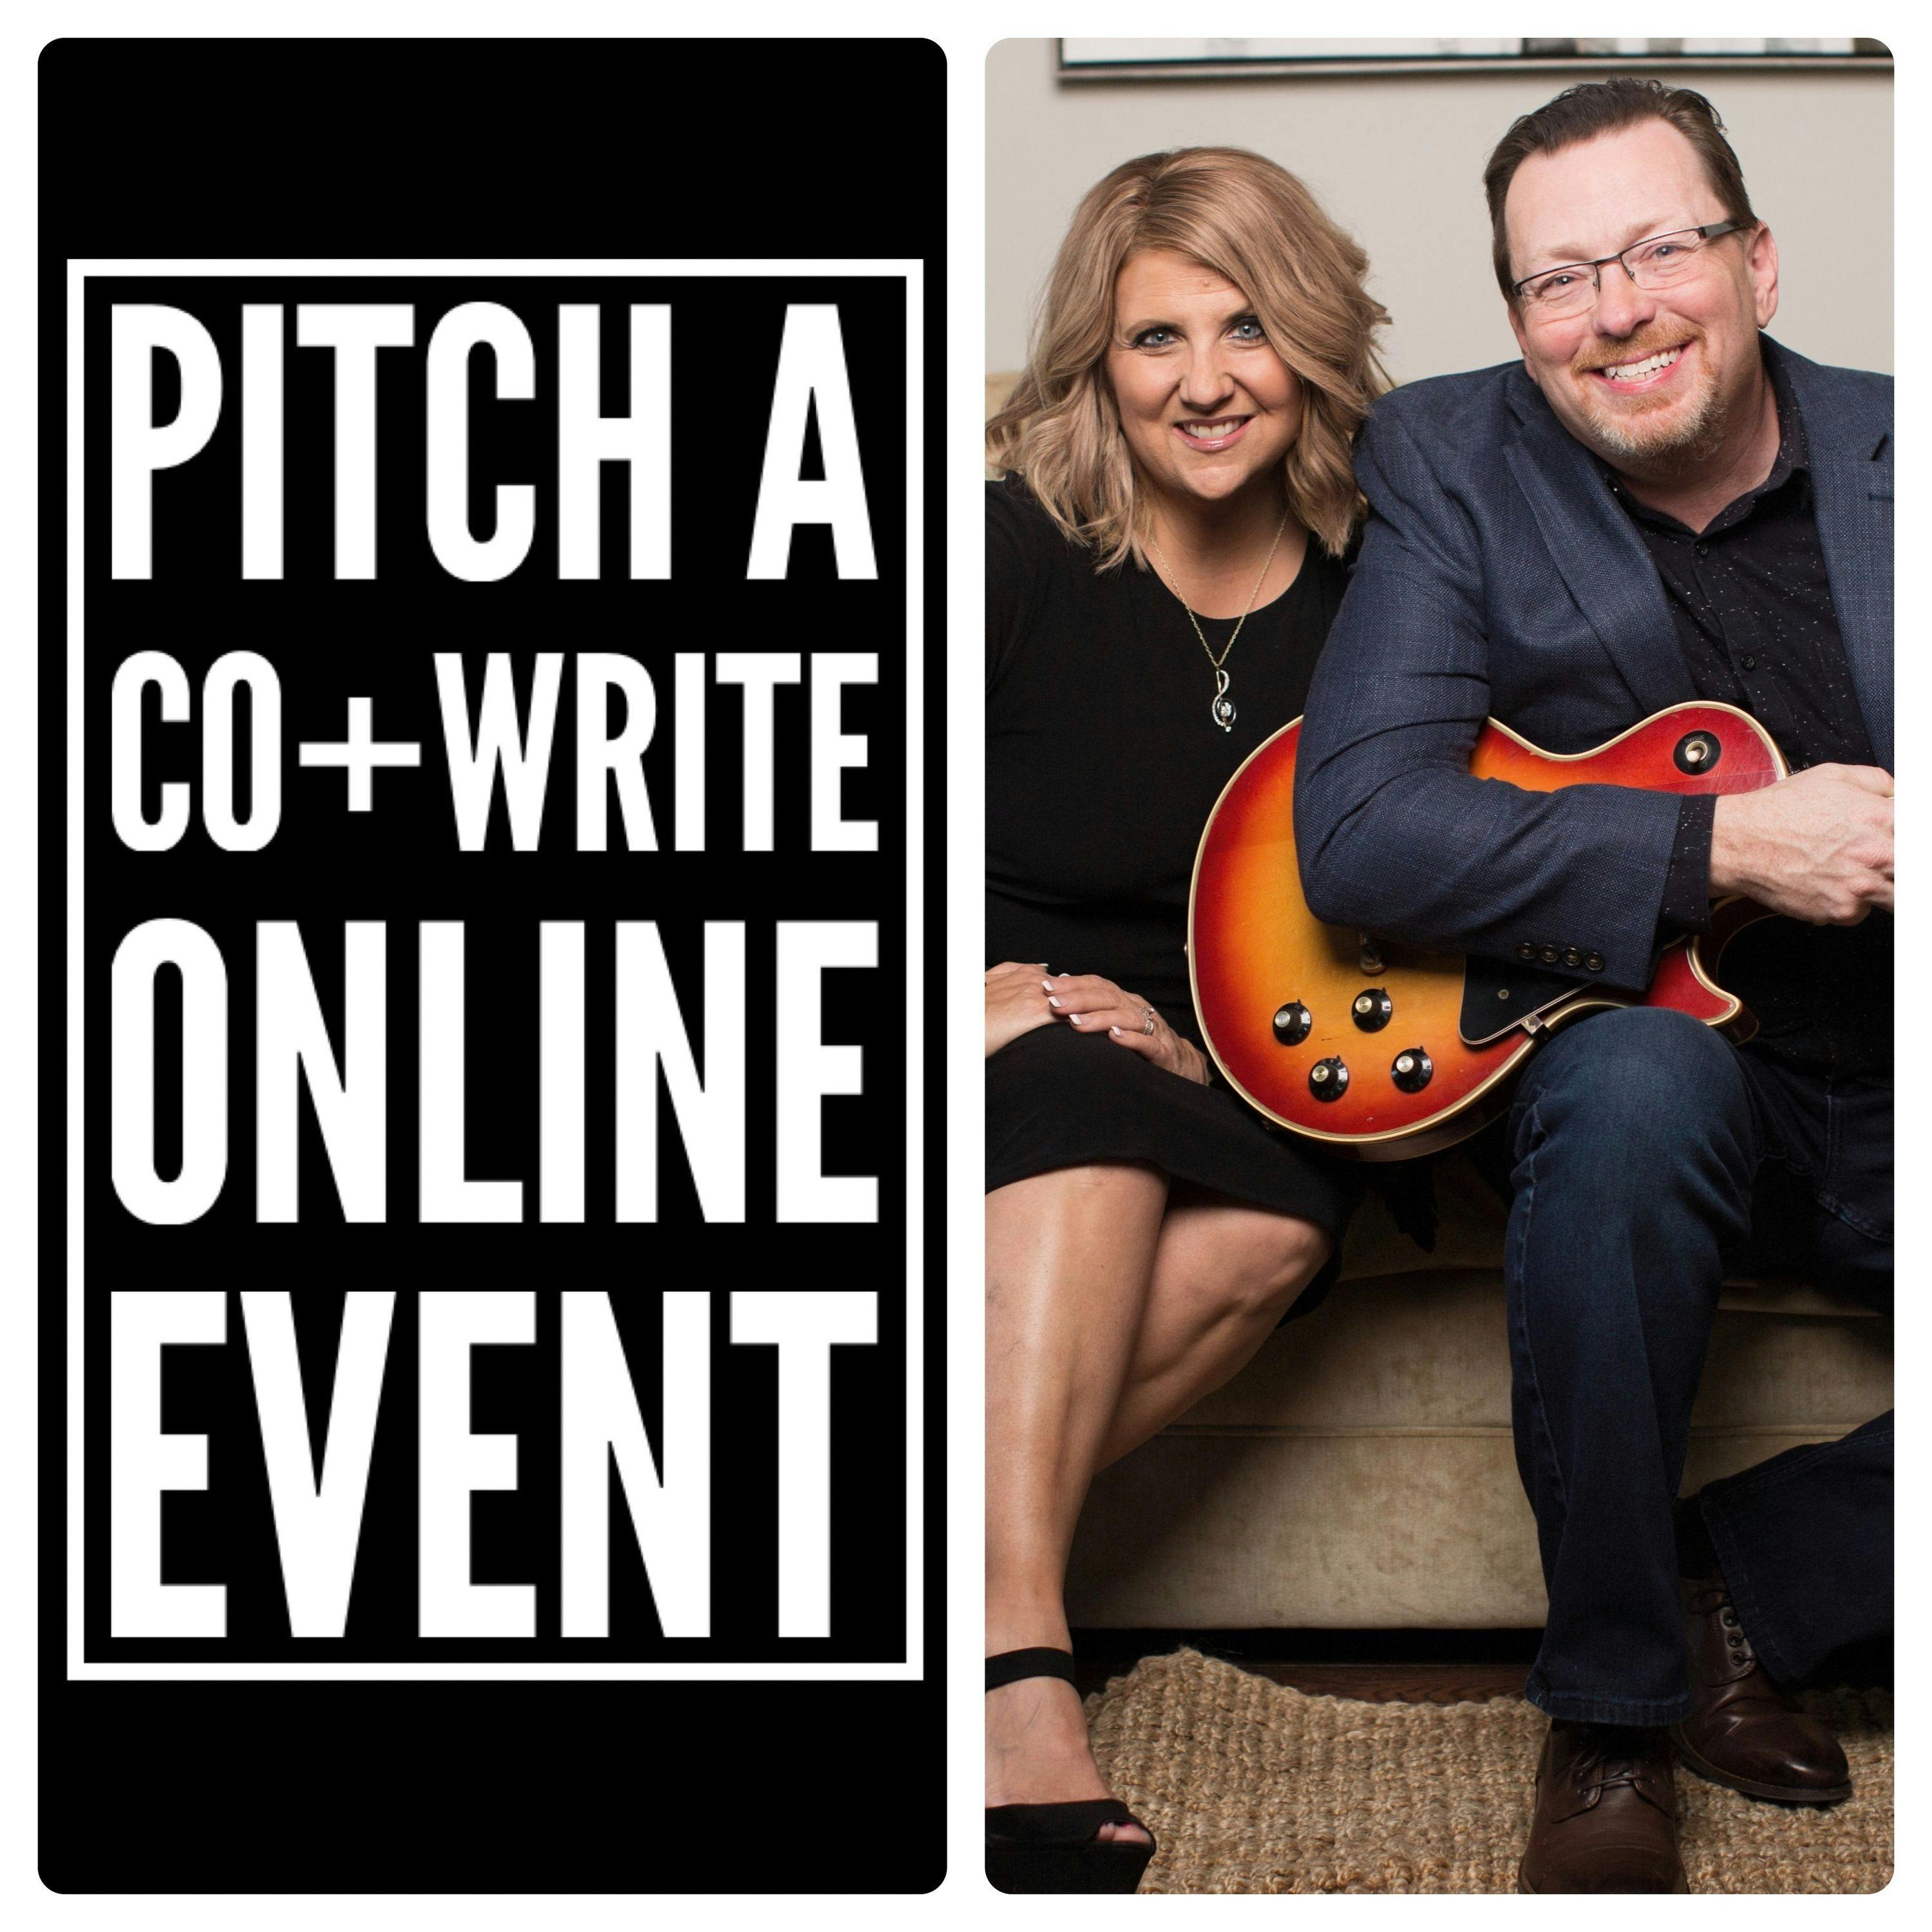 Announcement: Co+Write Pitch Event!